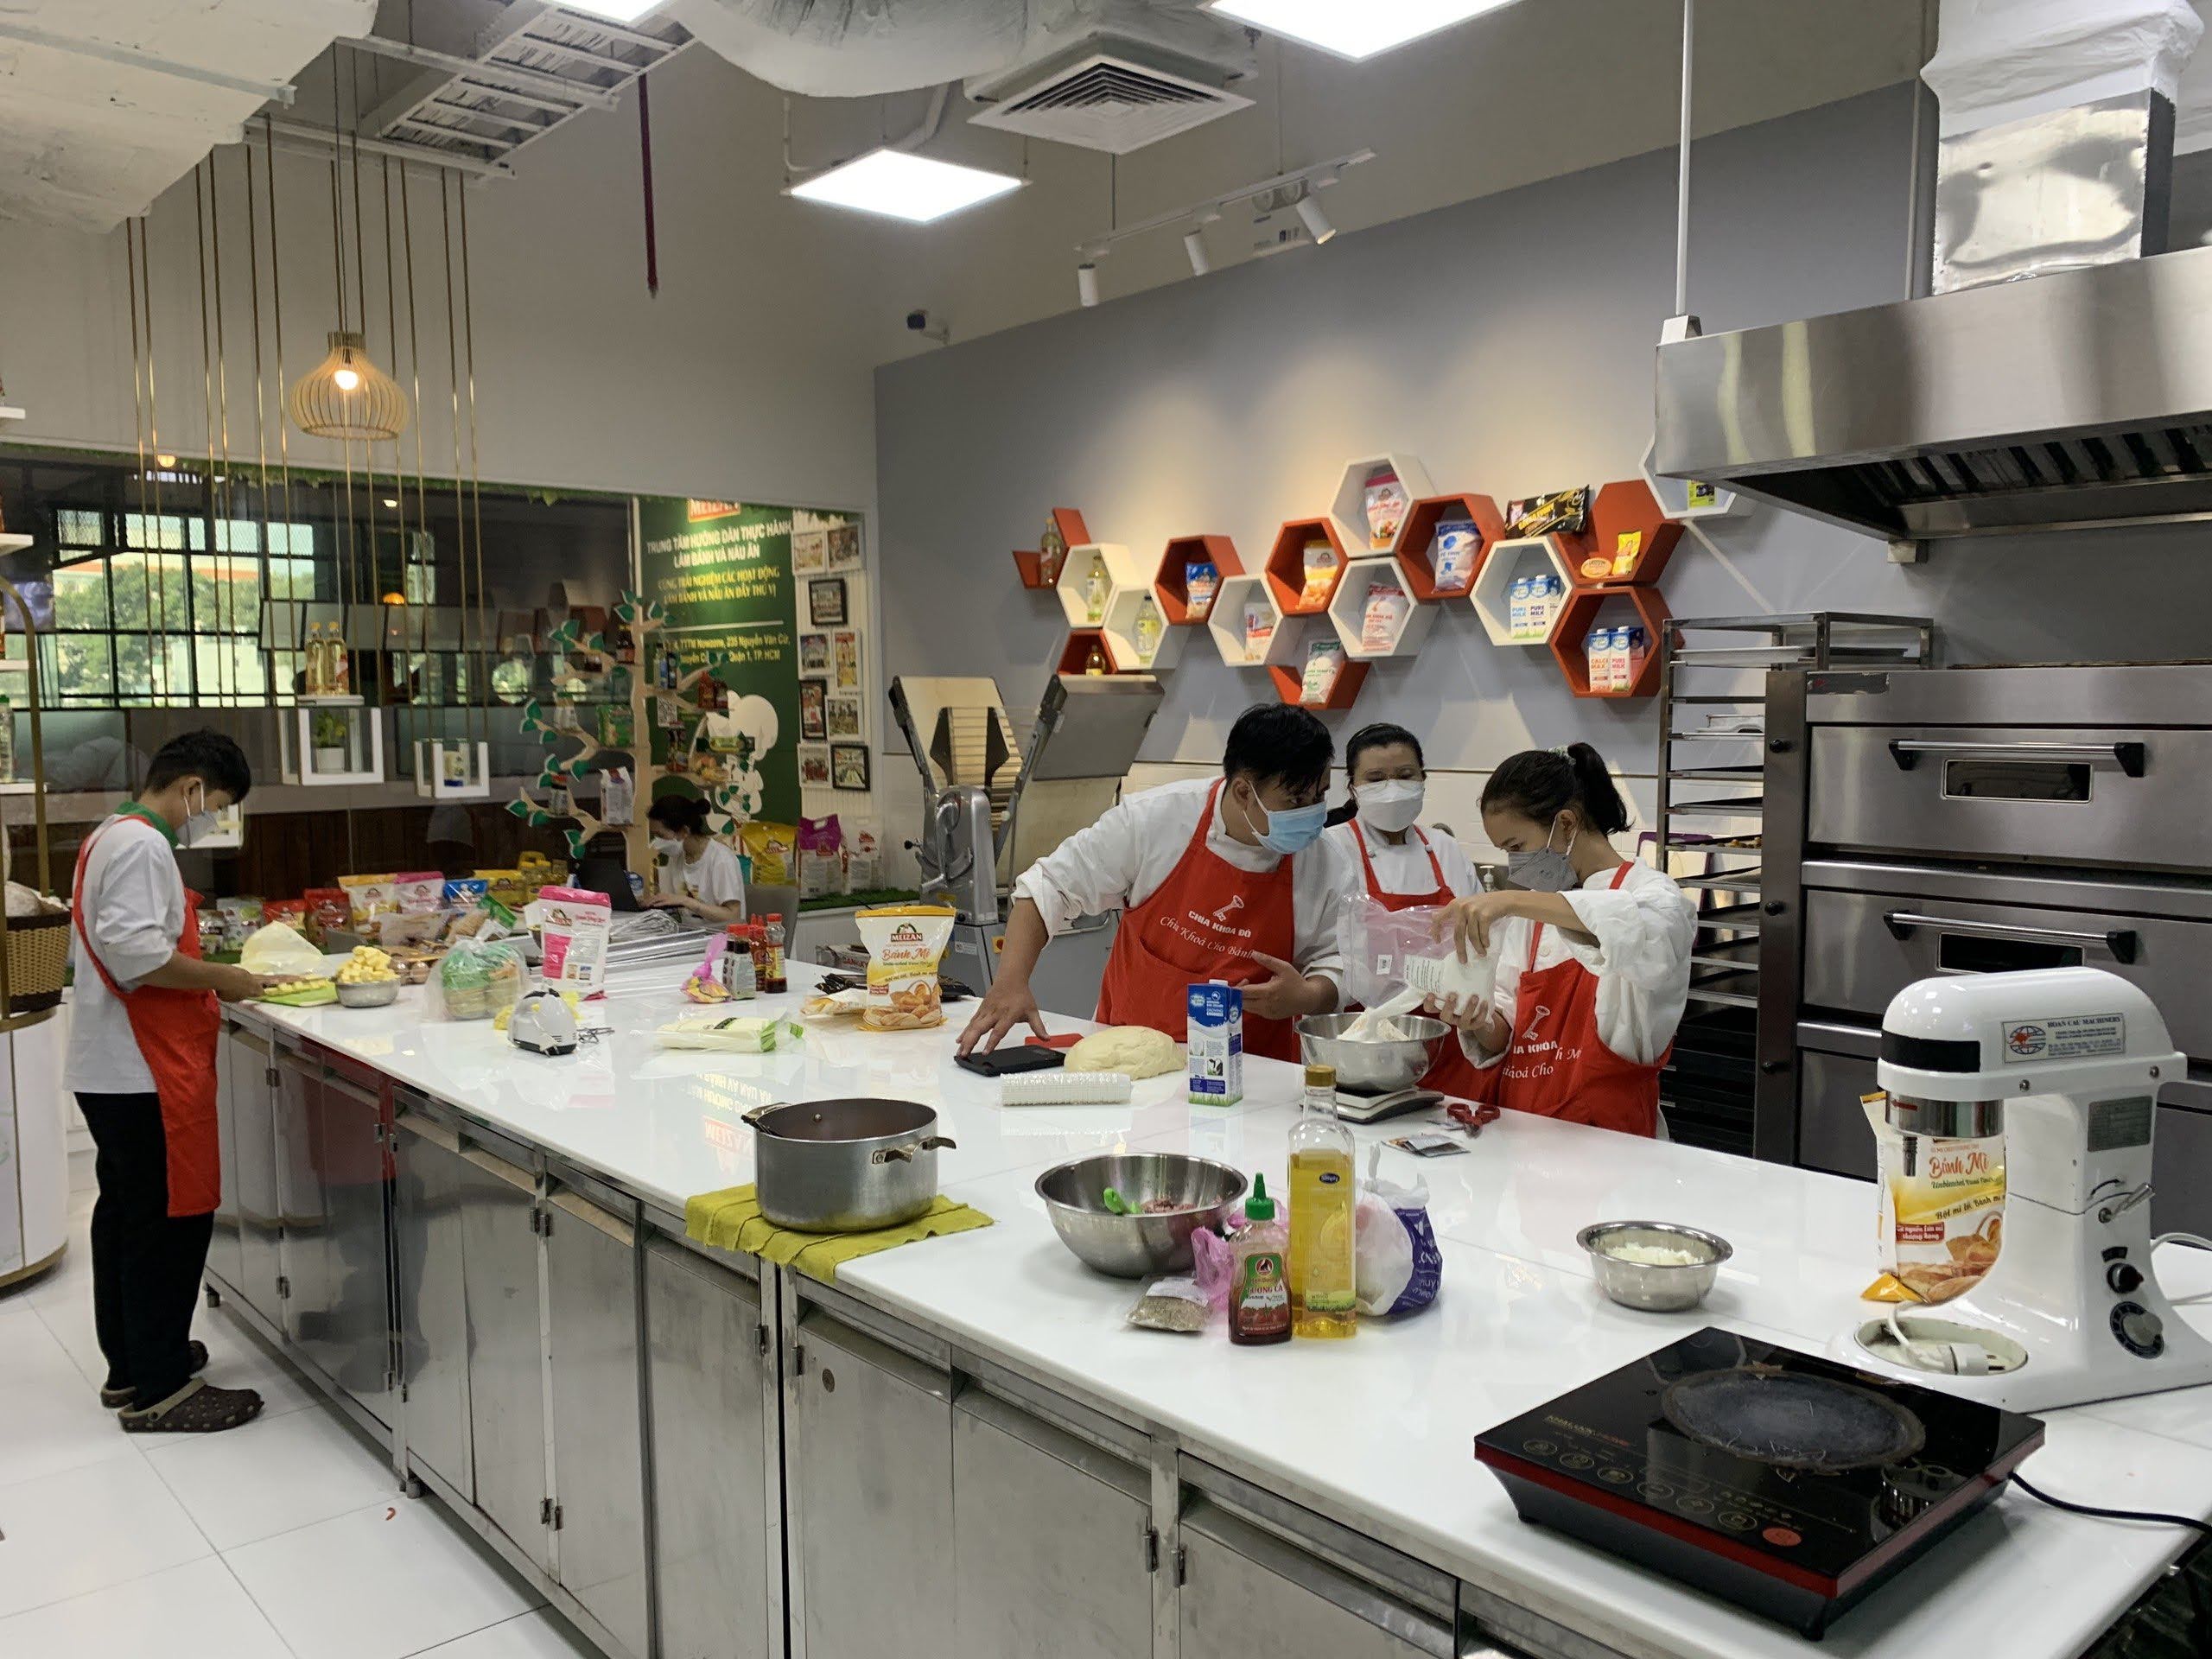 A supplied photo shows trainees are instructed during the 2021 ‘Cho Di La Con Mai – Kien Tao Tuong Lai’ program held by the World Association of Master Chefs - Vietnam Chapter.